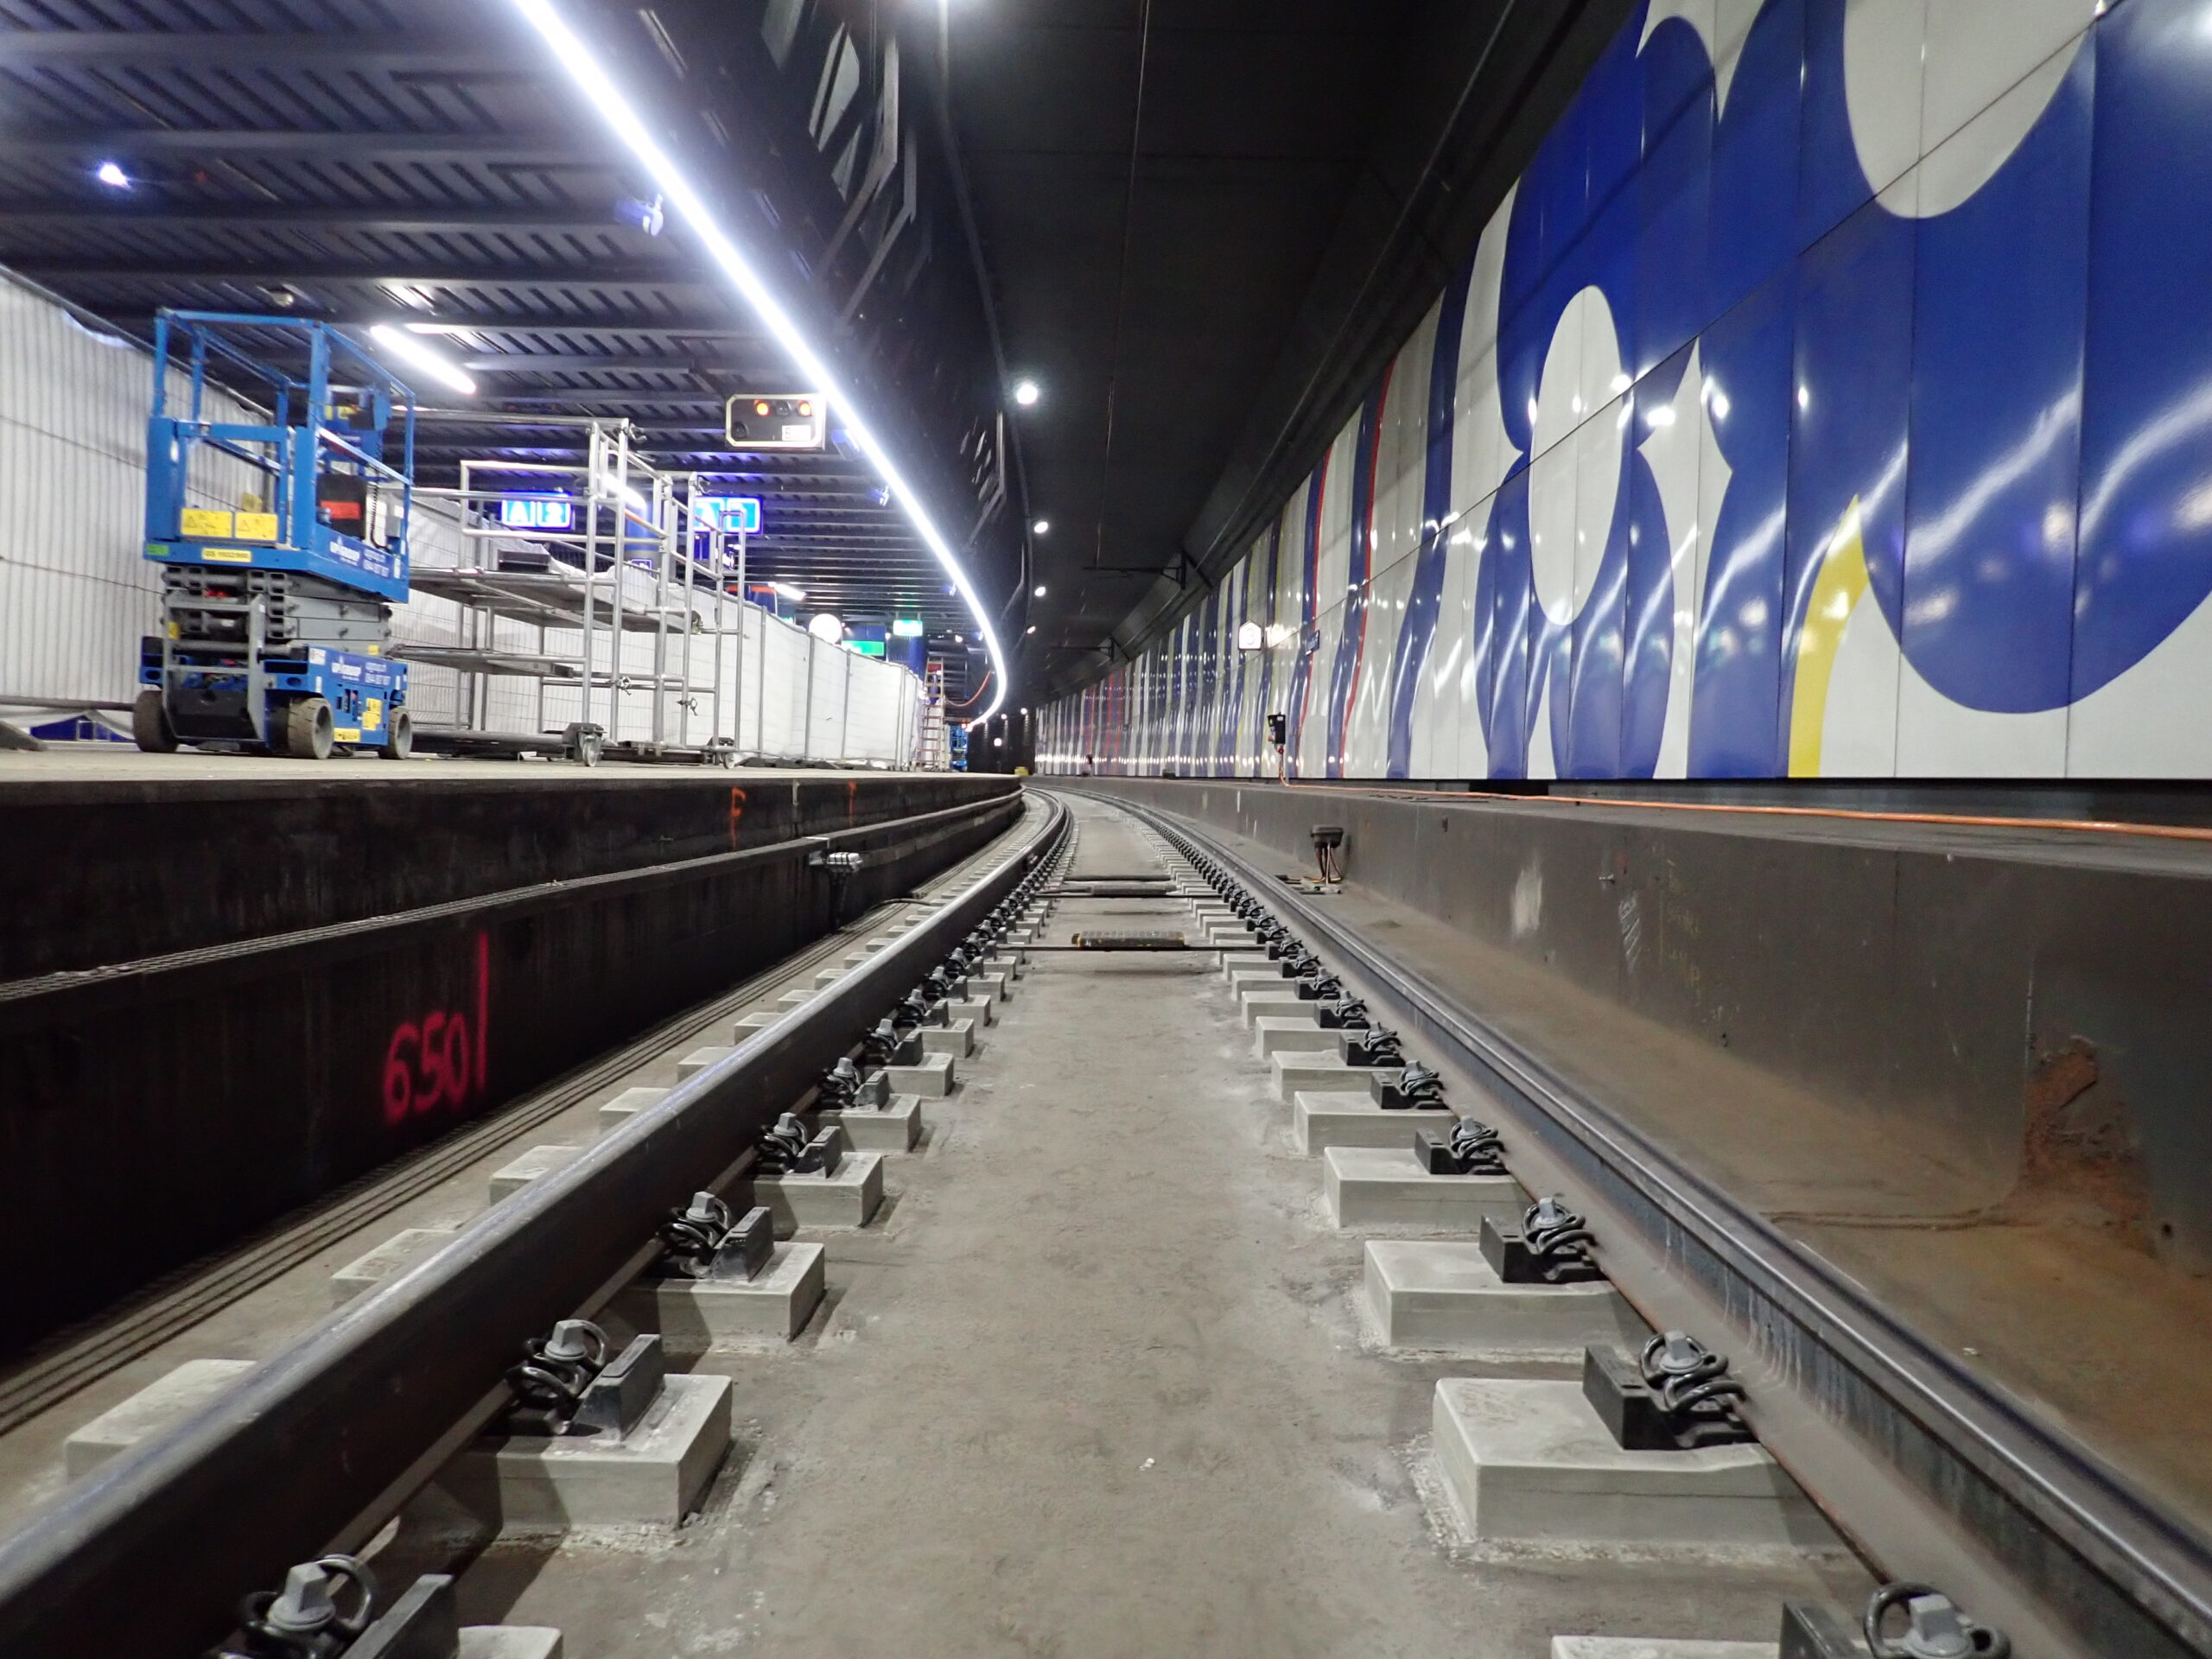 The ballastless track in Zurich Airport station. We replaced the rails and sleeper blocks while the decades-old slab remains in place for another 50 years at least